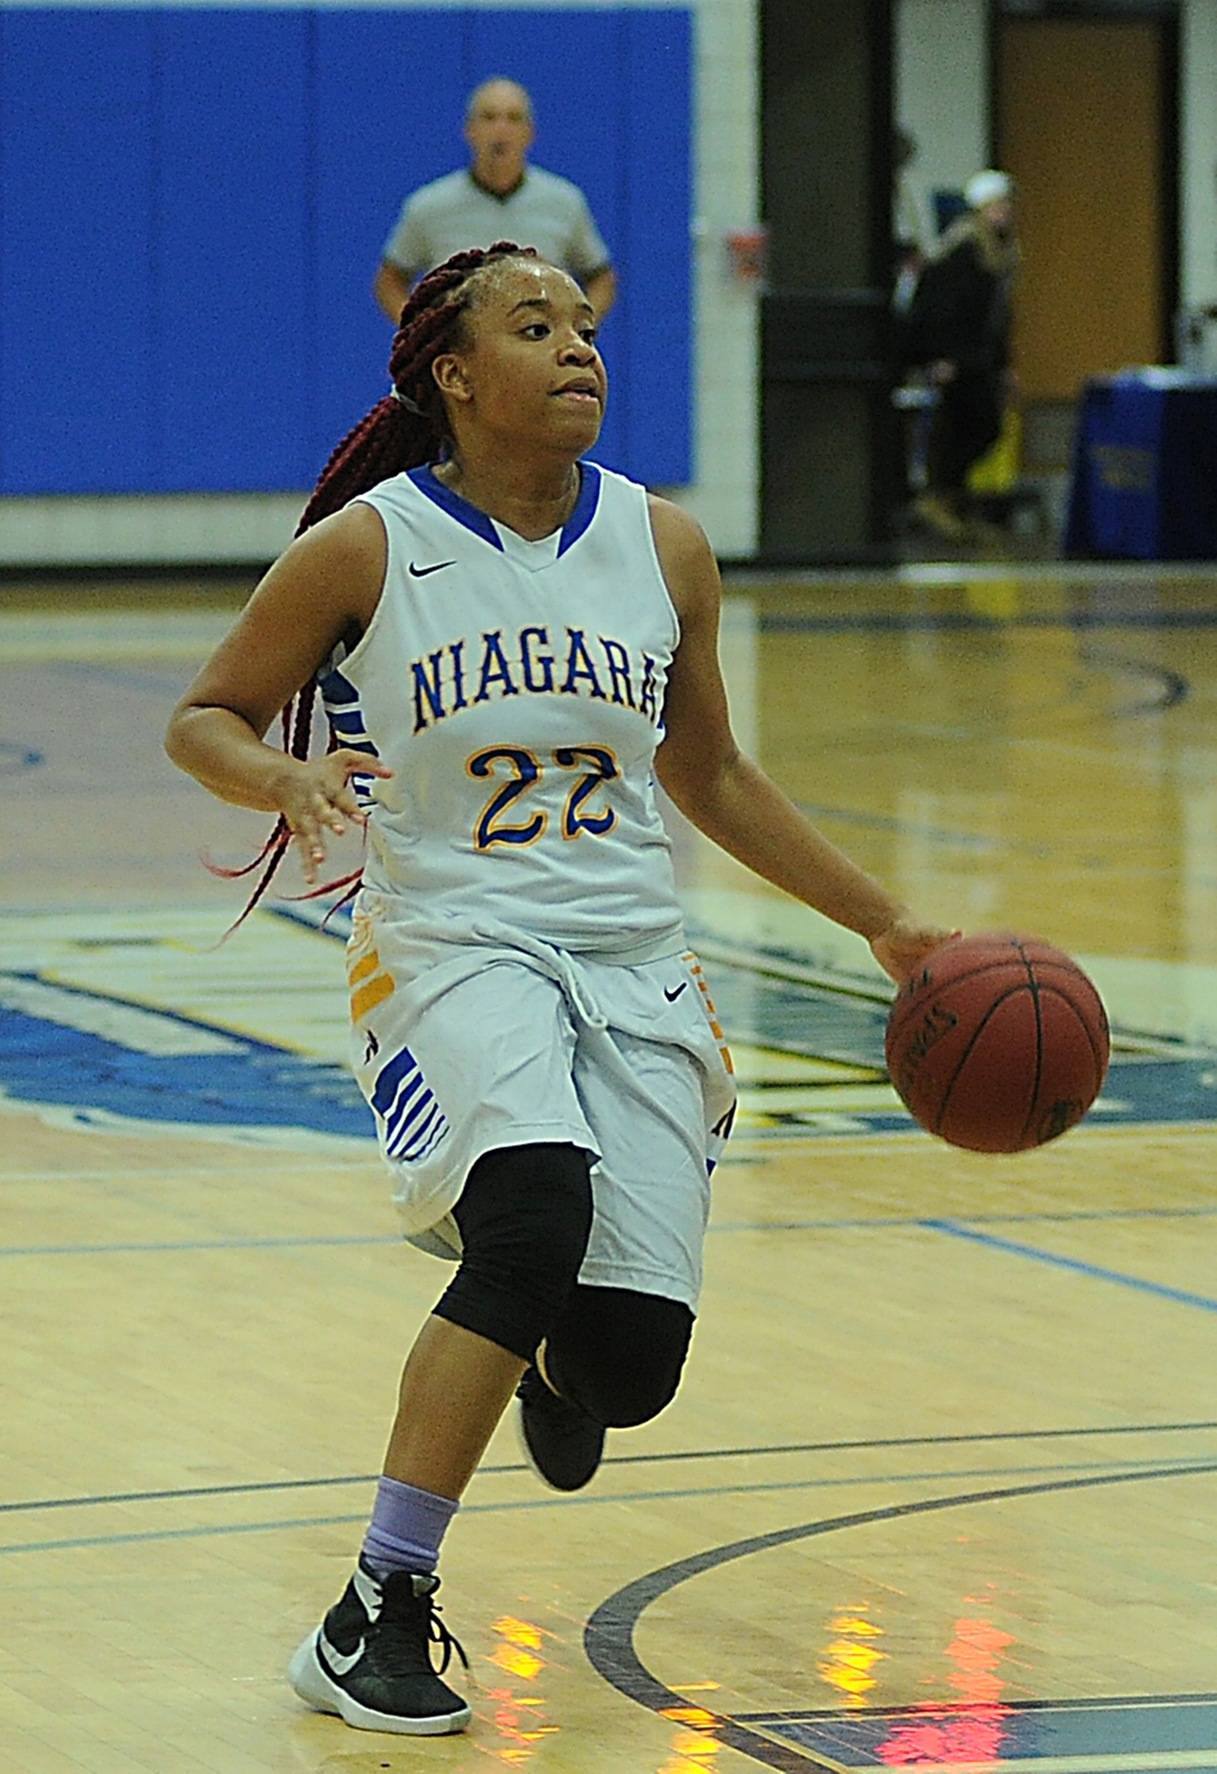 NCCC starts second semester with win